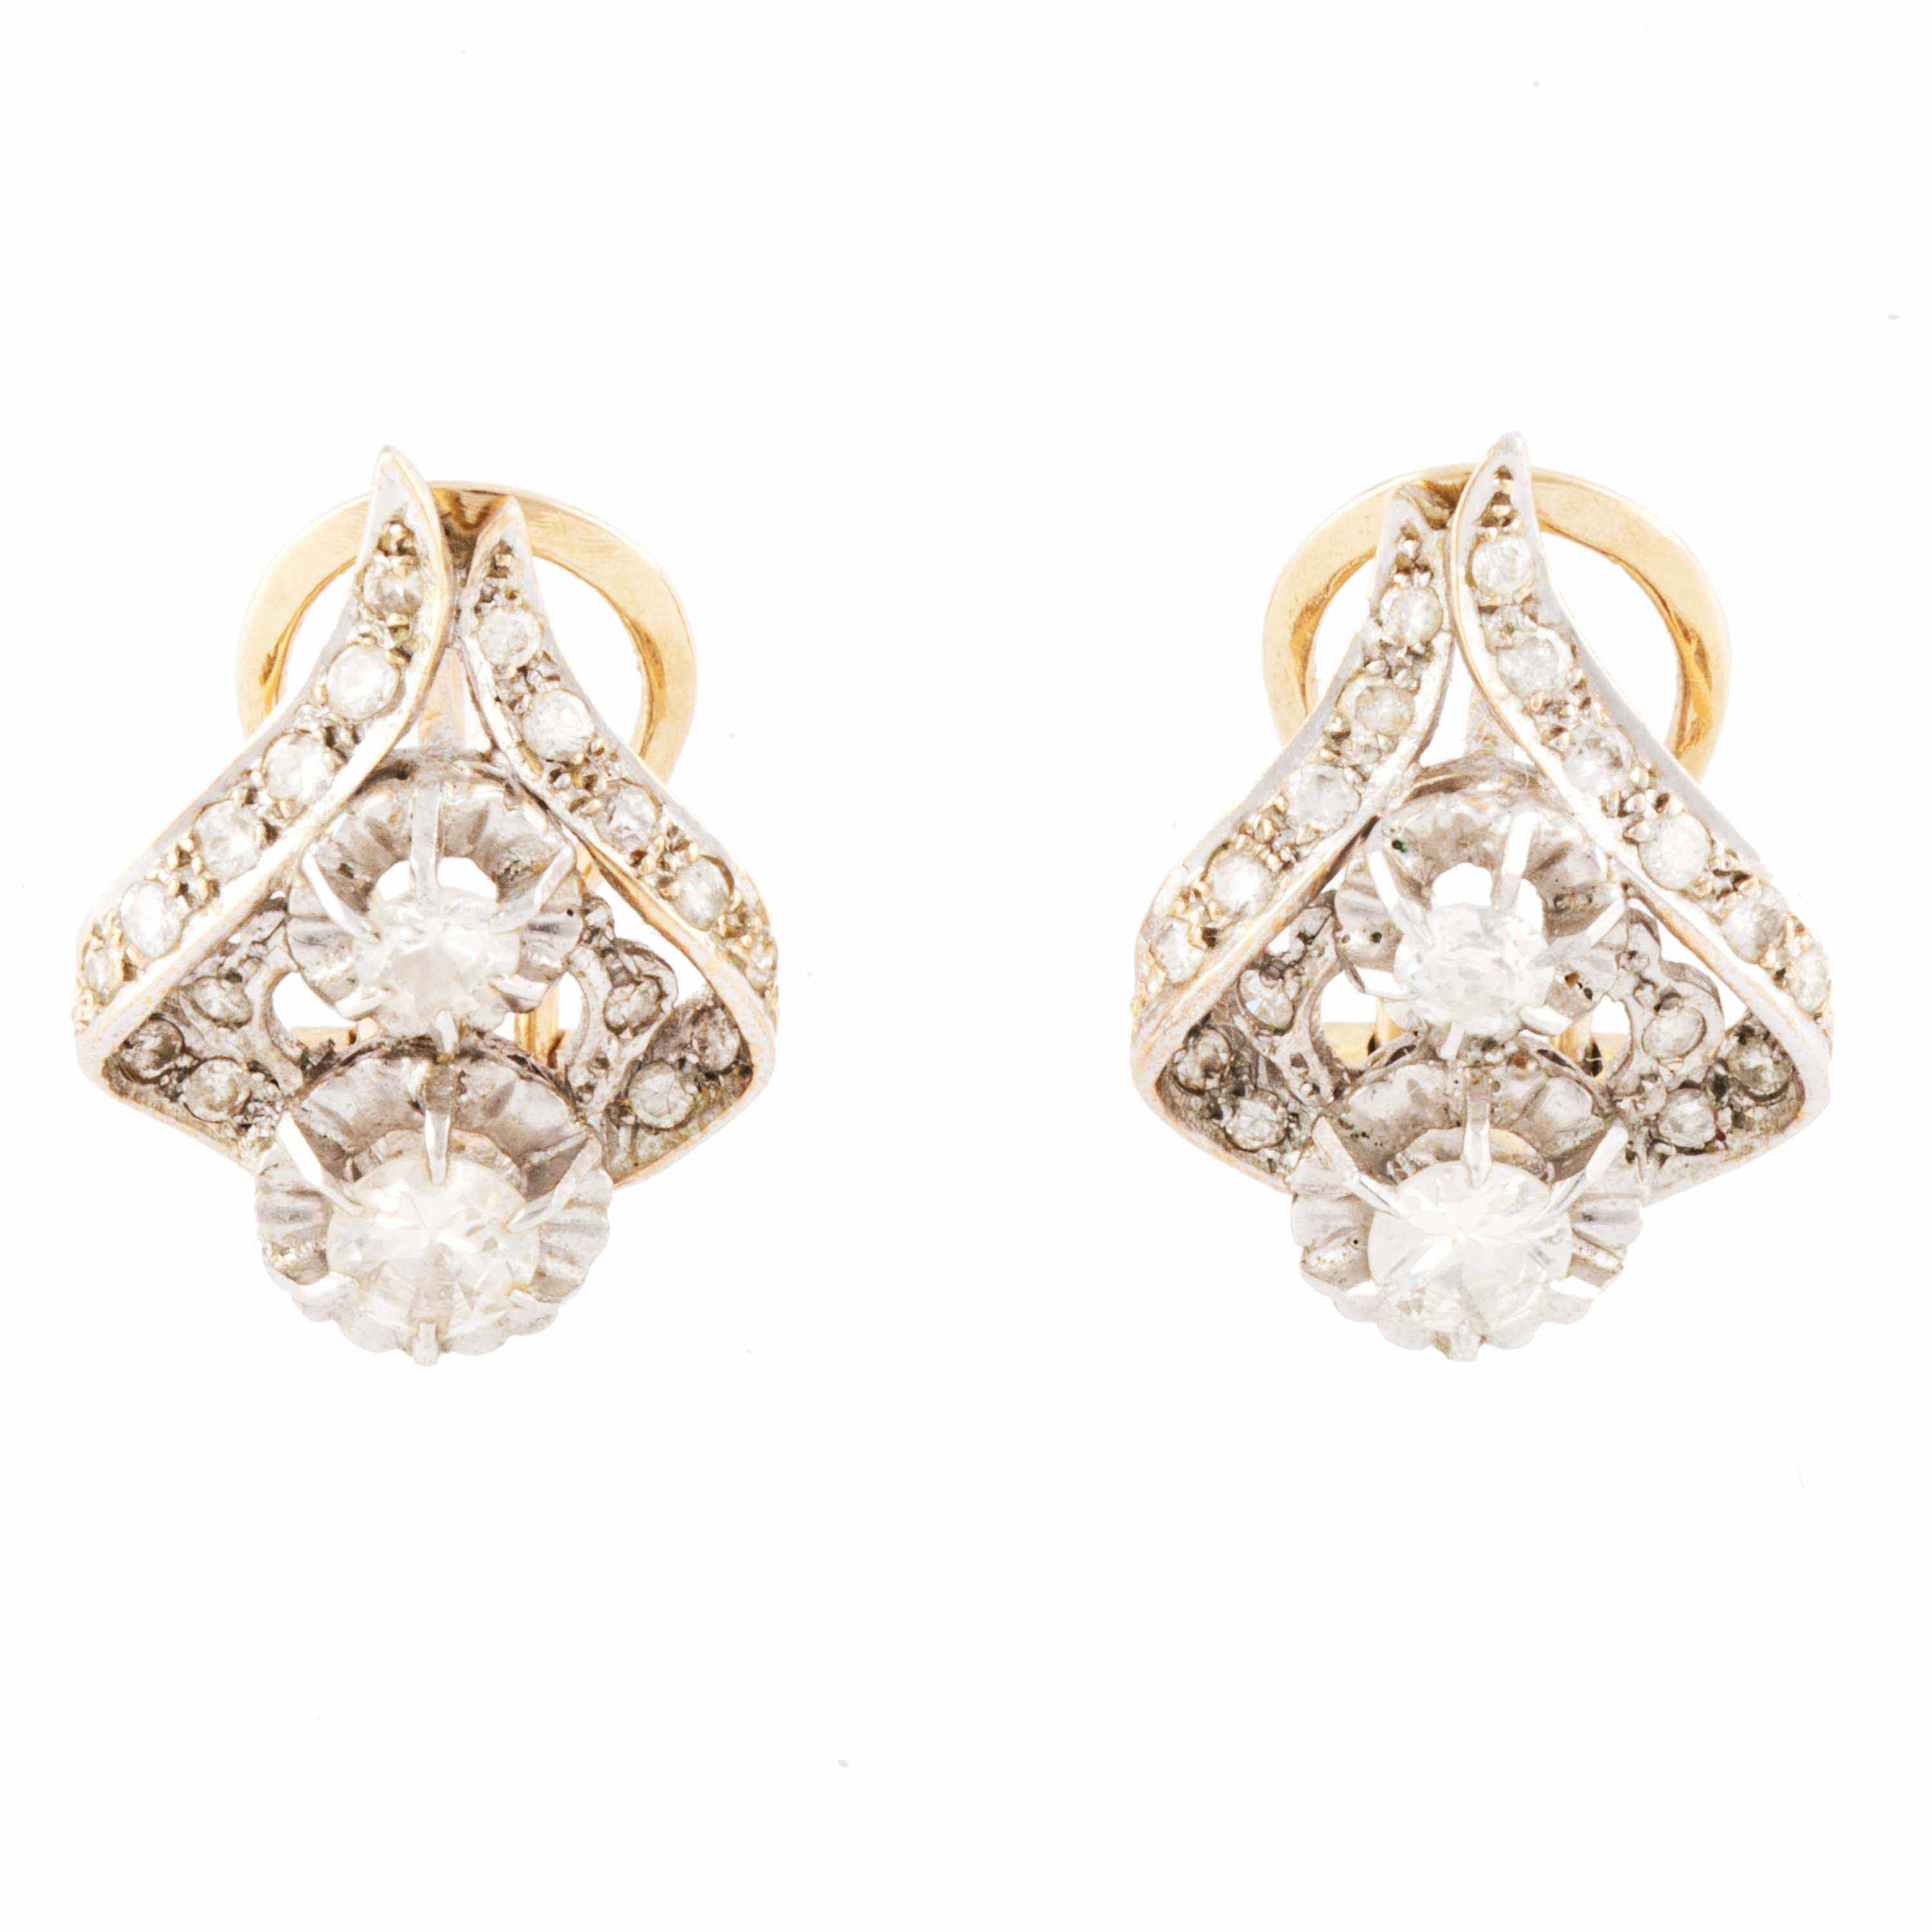 GOLD AND DIAMOND EARRINGS. 